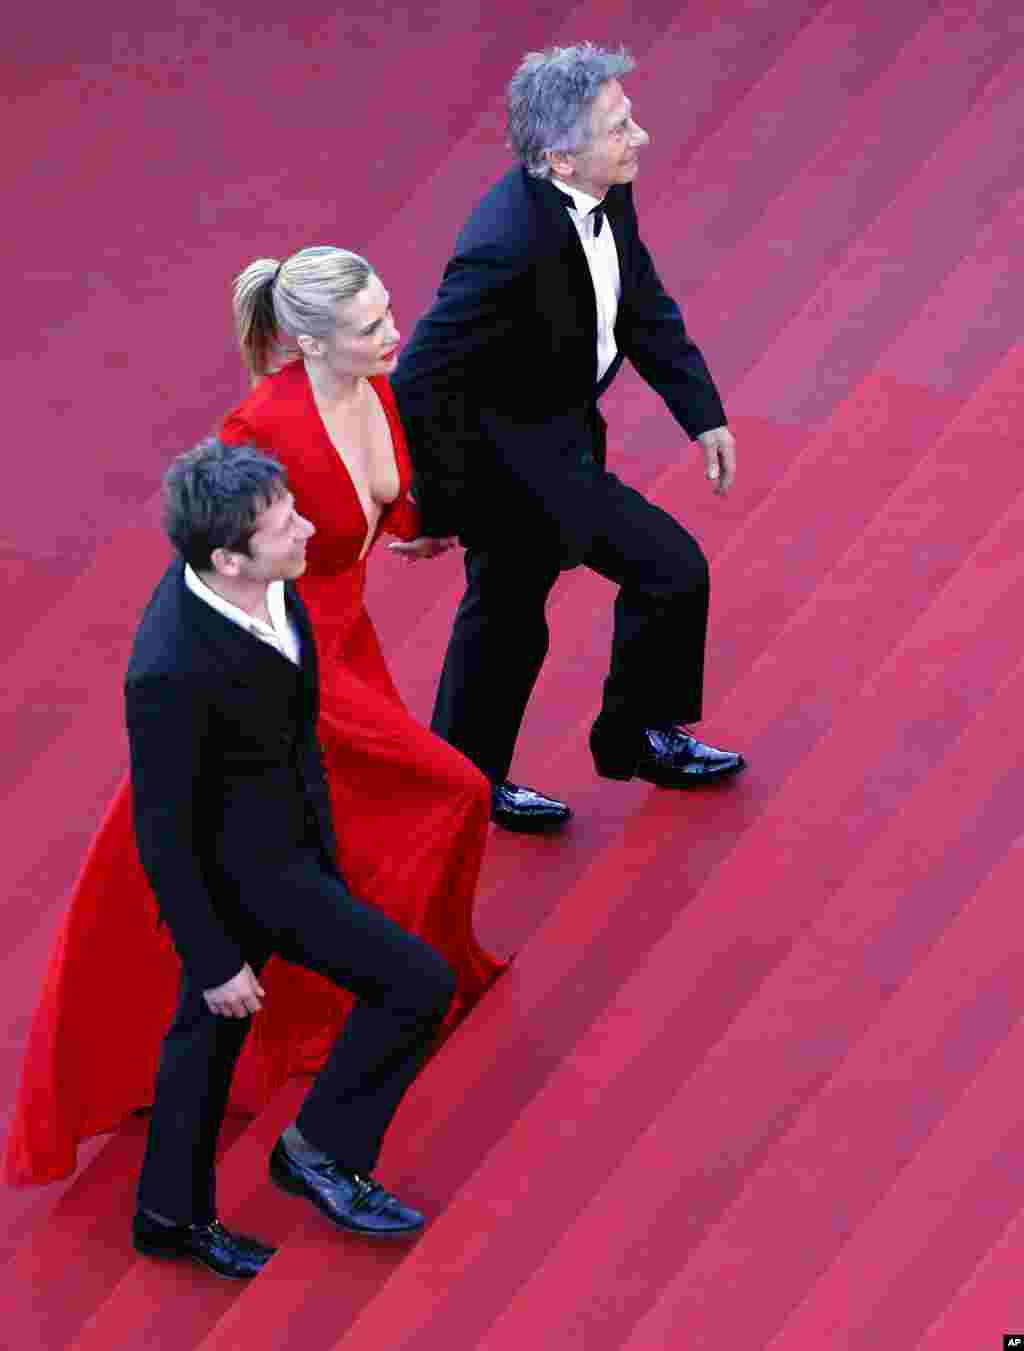 Roman Polanski, actress Emmanuelle Seigner, and actor Mathieu Amalric arrive for the screening of the film "Venus in Fur" during the 66th Cannes Film Festival, May 25, 2013.